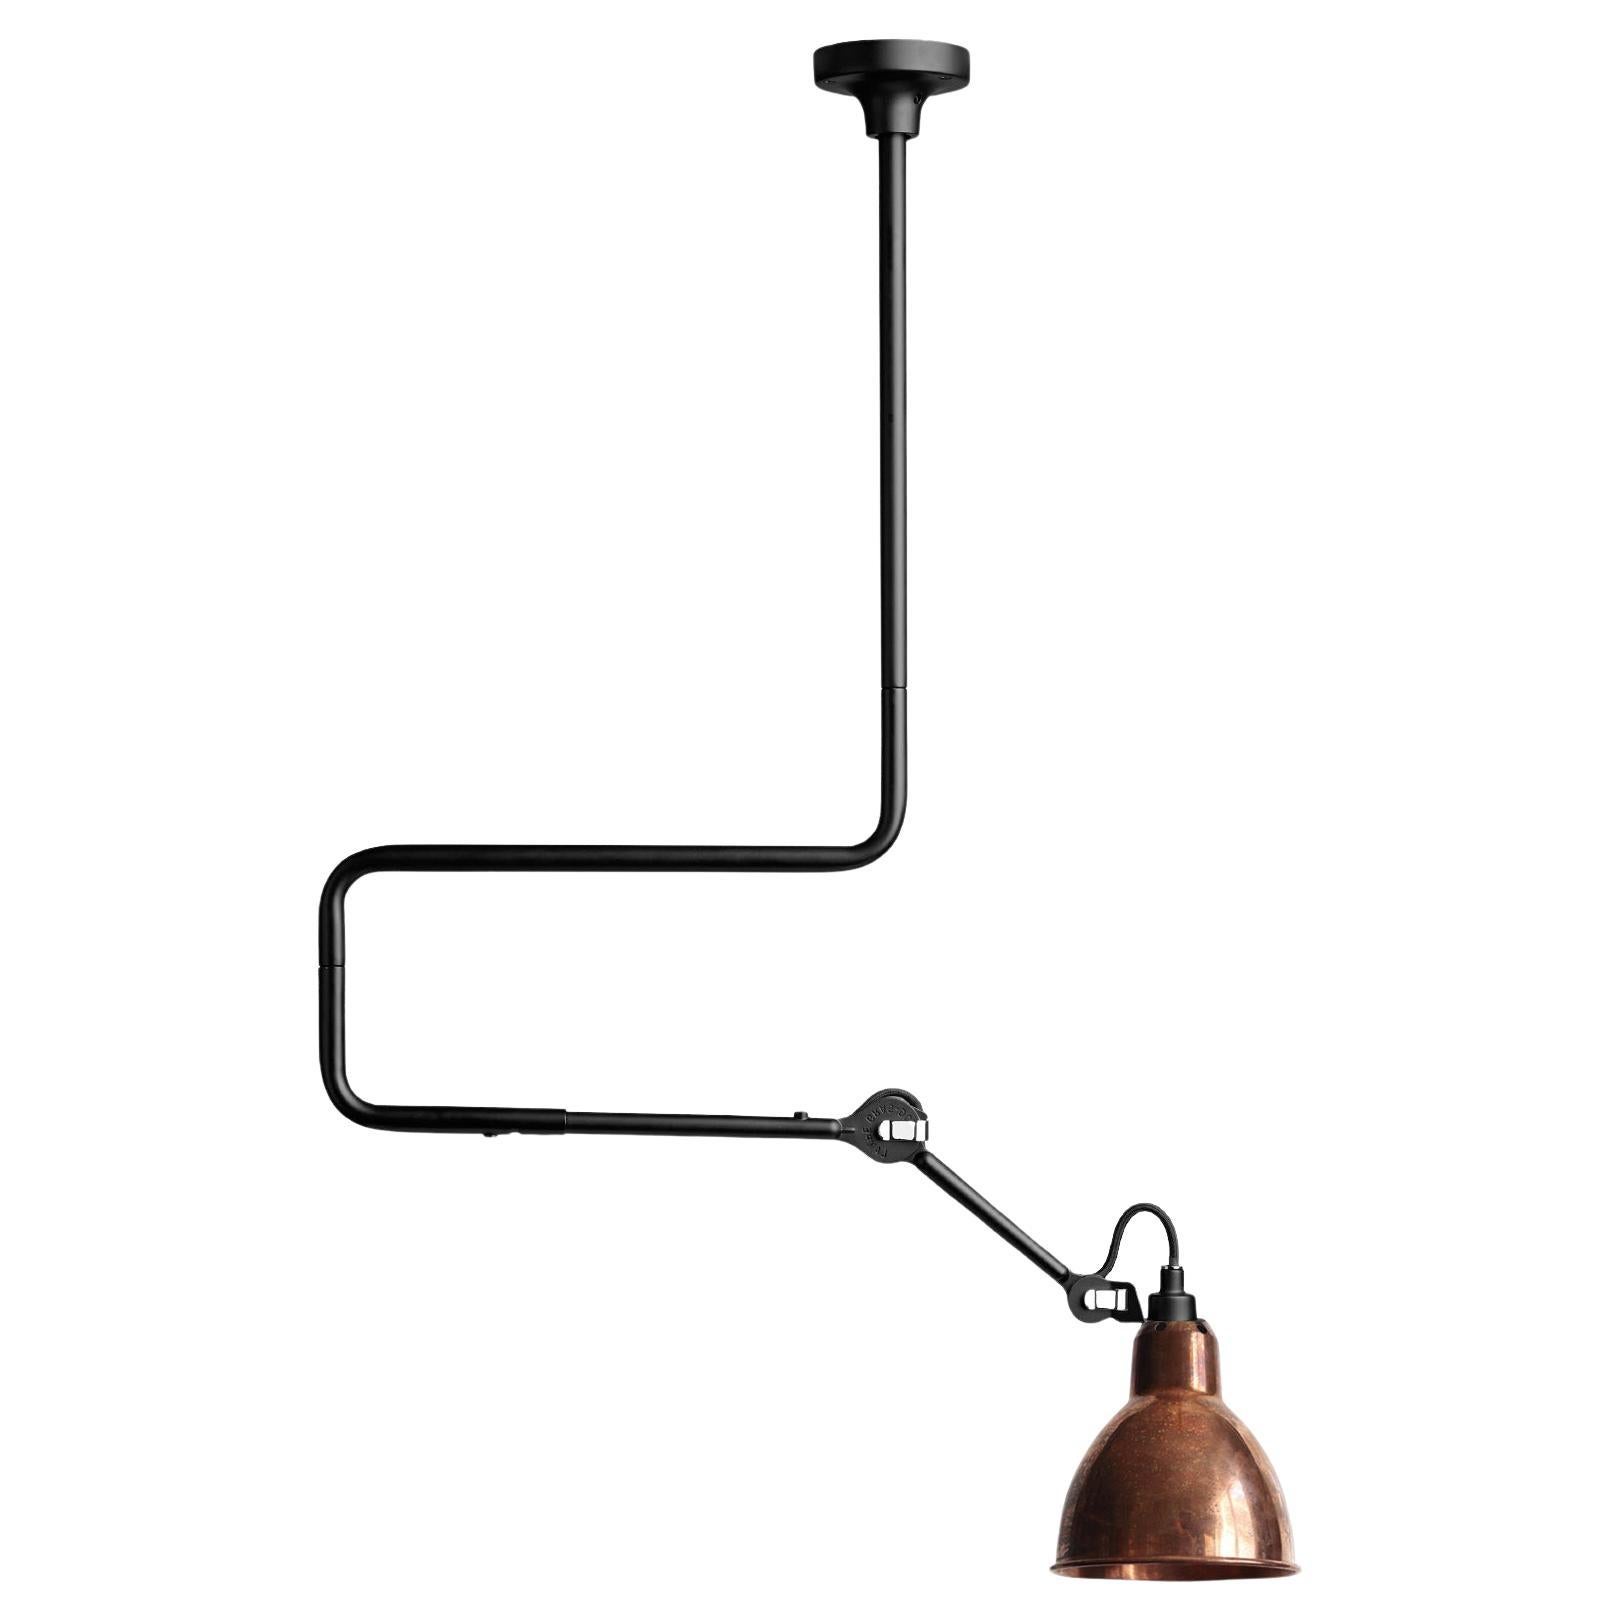 DCW Editions La Lampe Gras N°312 Pendant Lamp in Raw Copper Shade For Sale